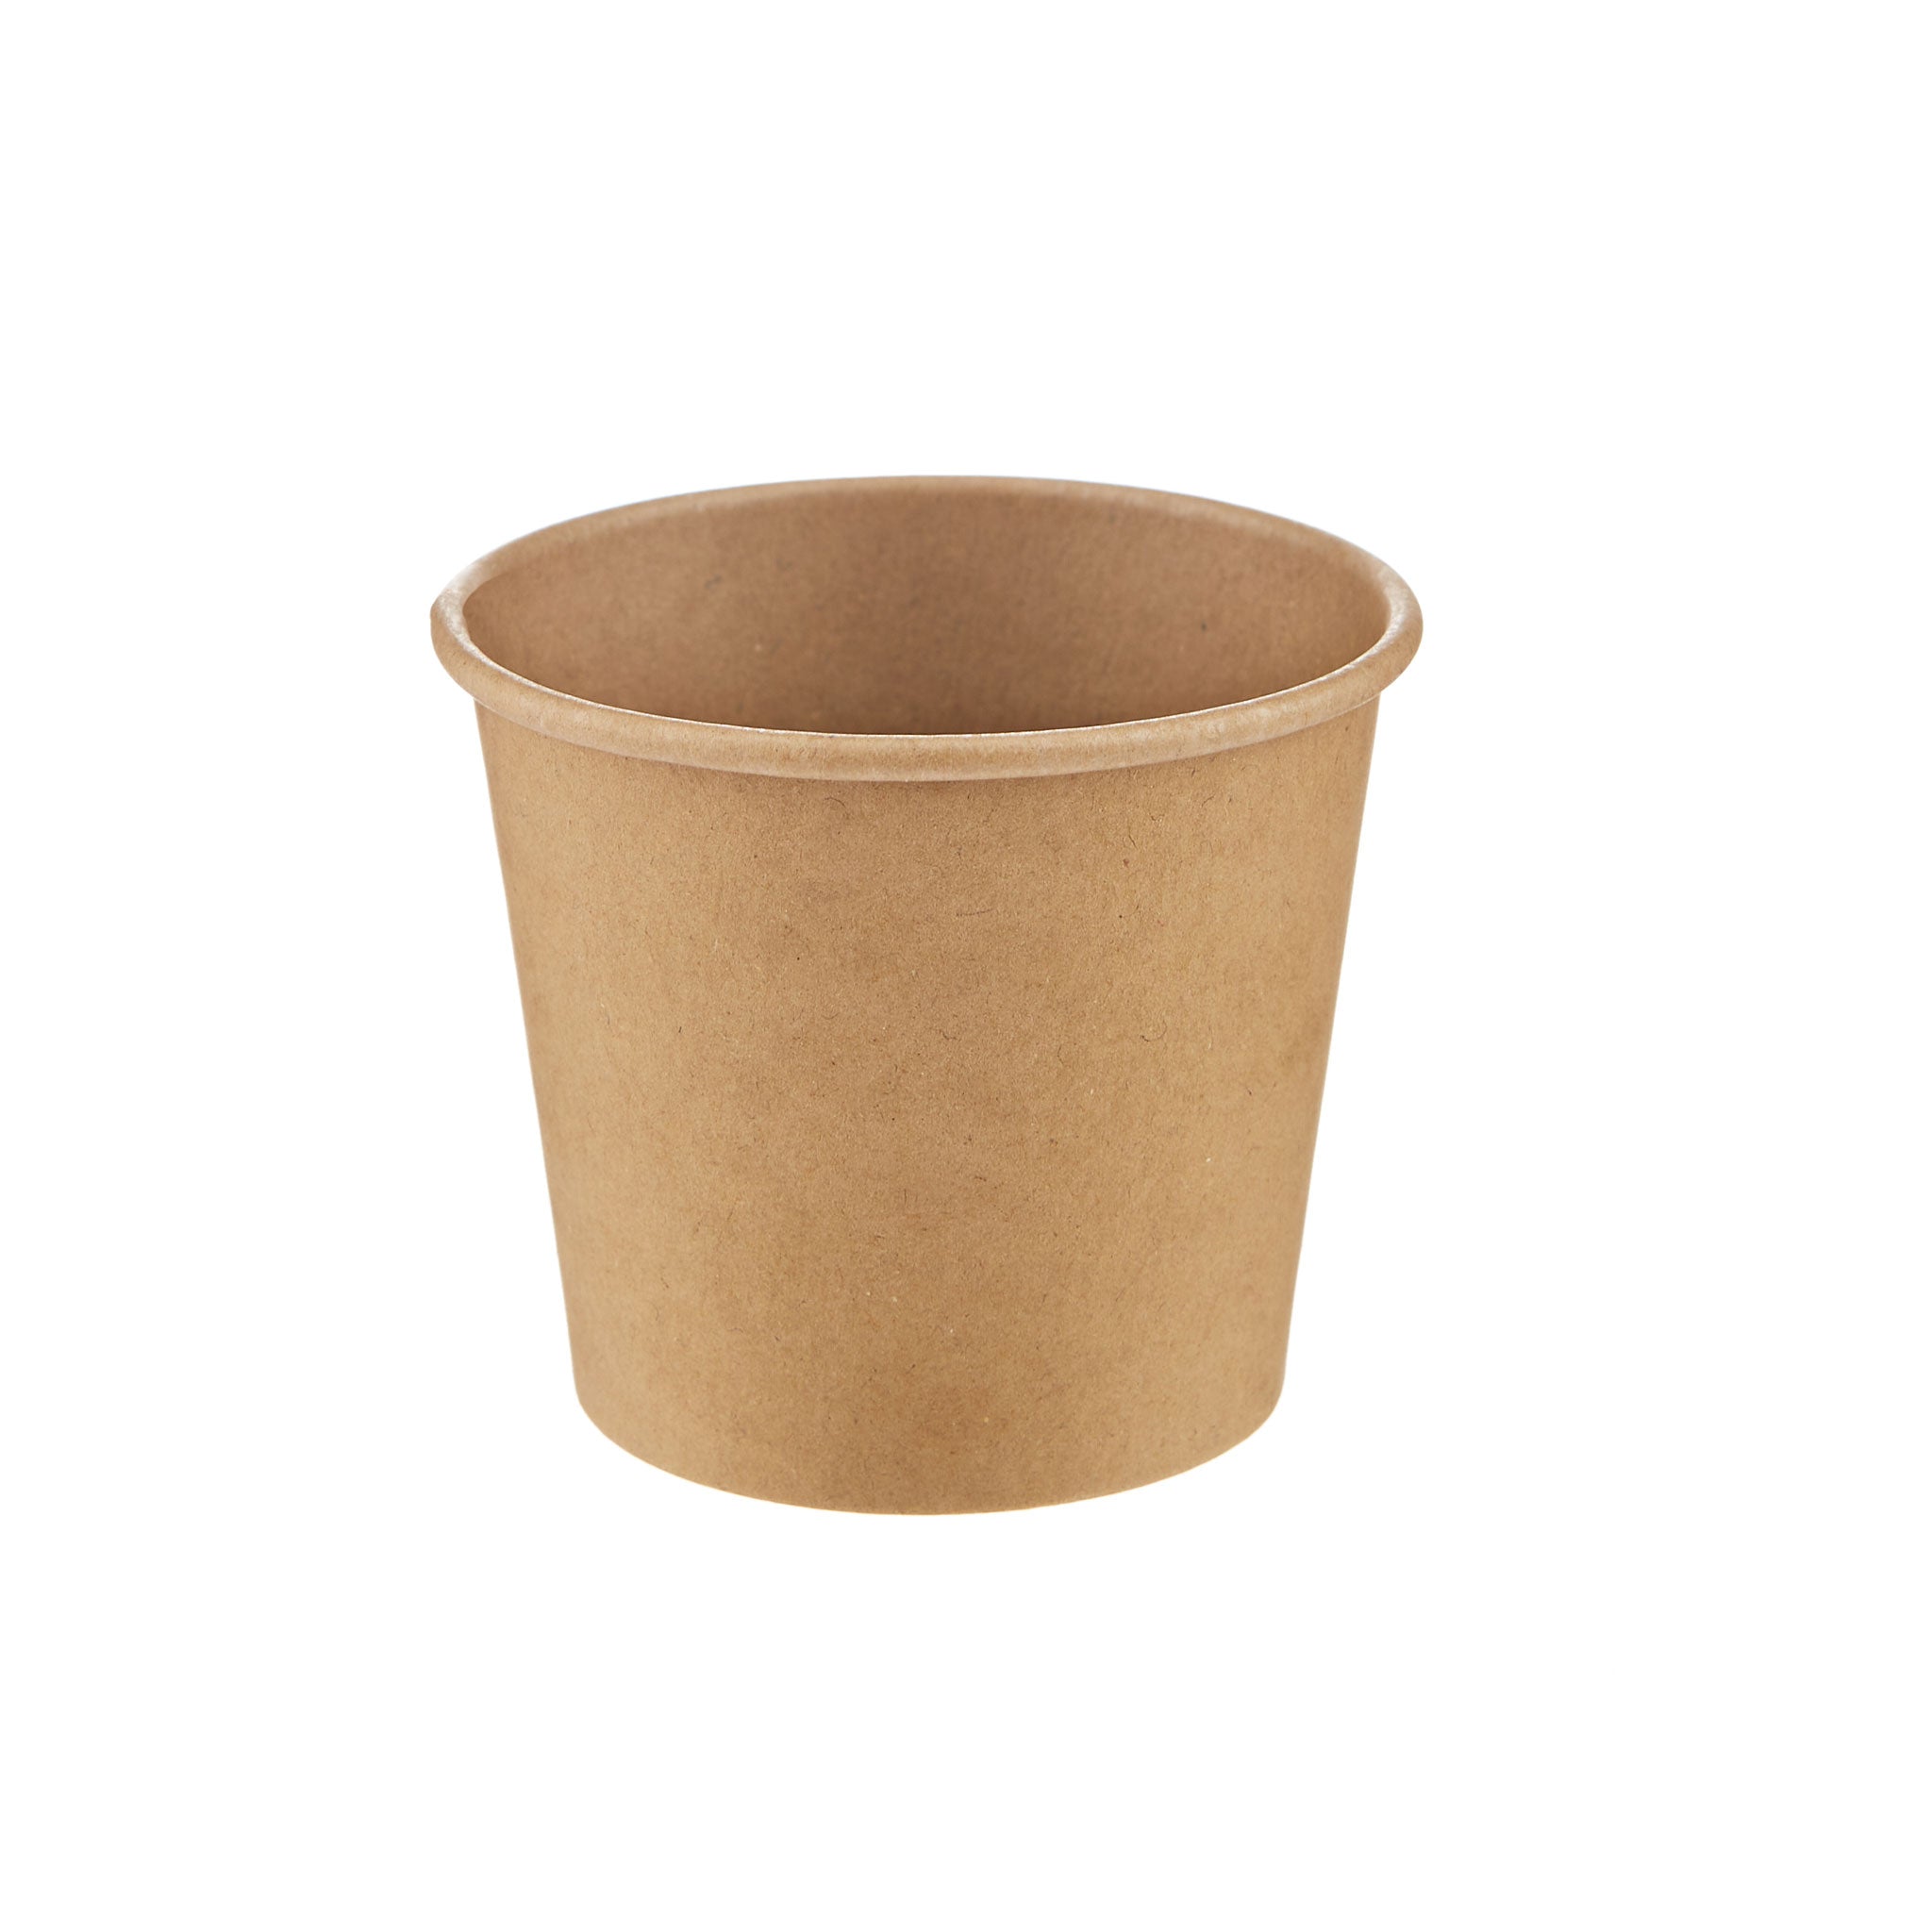 120 ml Kraft Paper Portion Cups 2000 Pieces - Hotpack Global